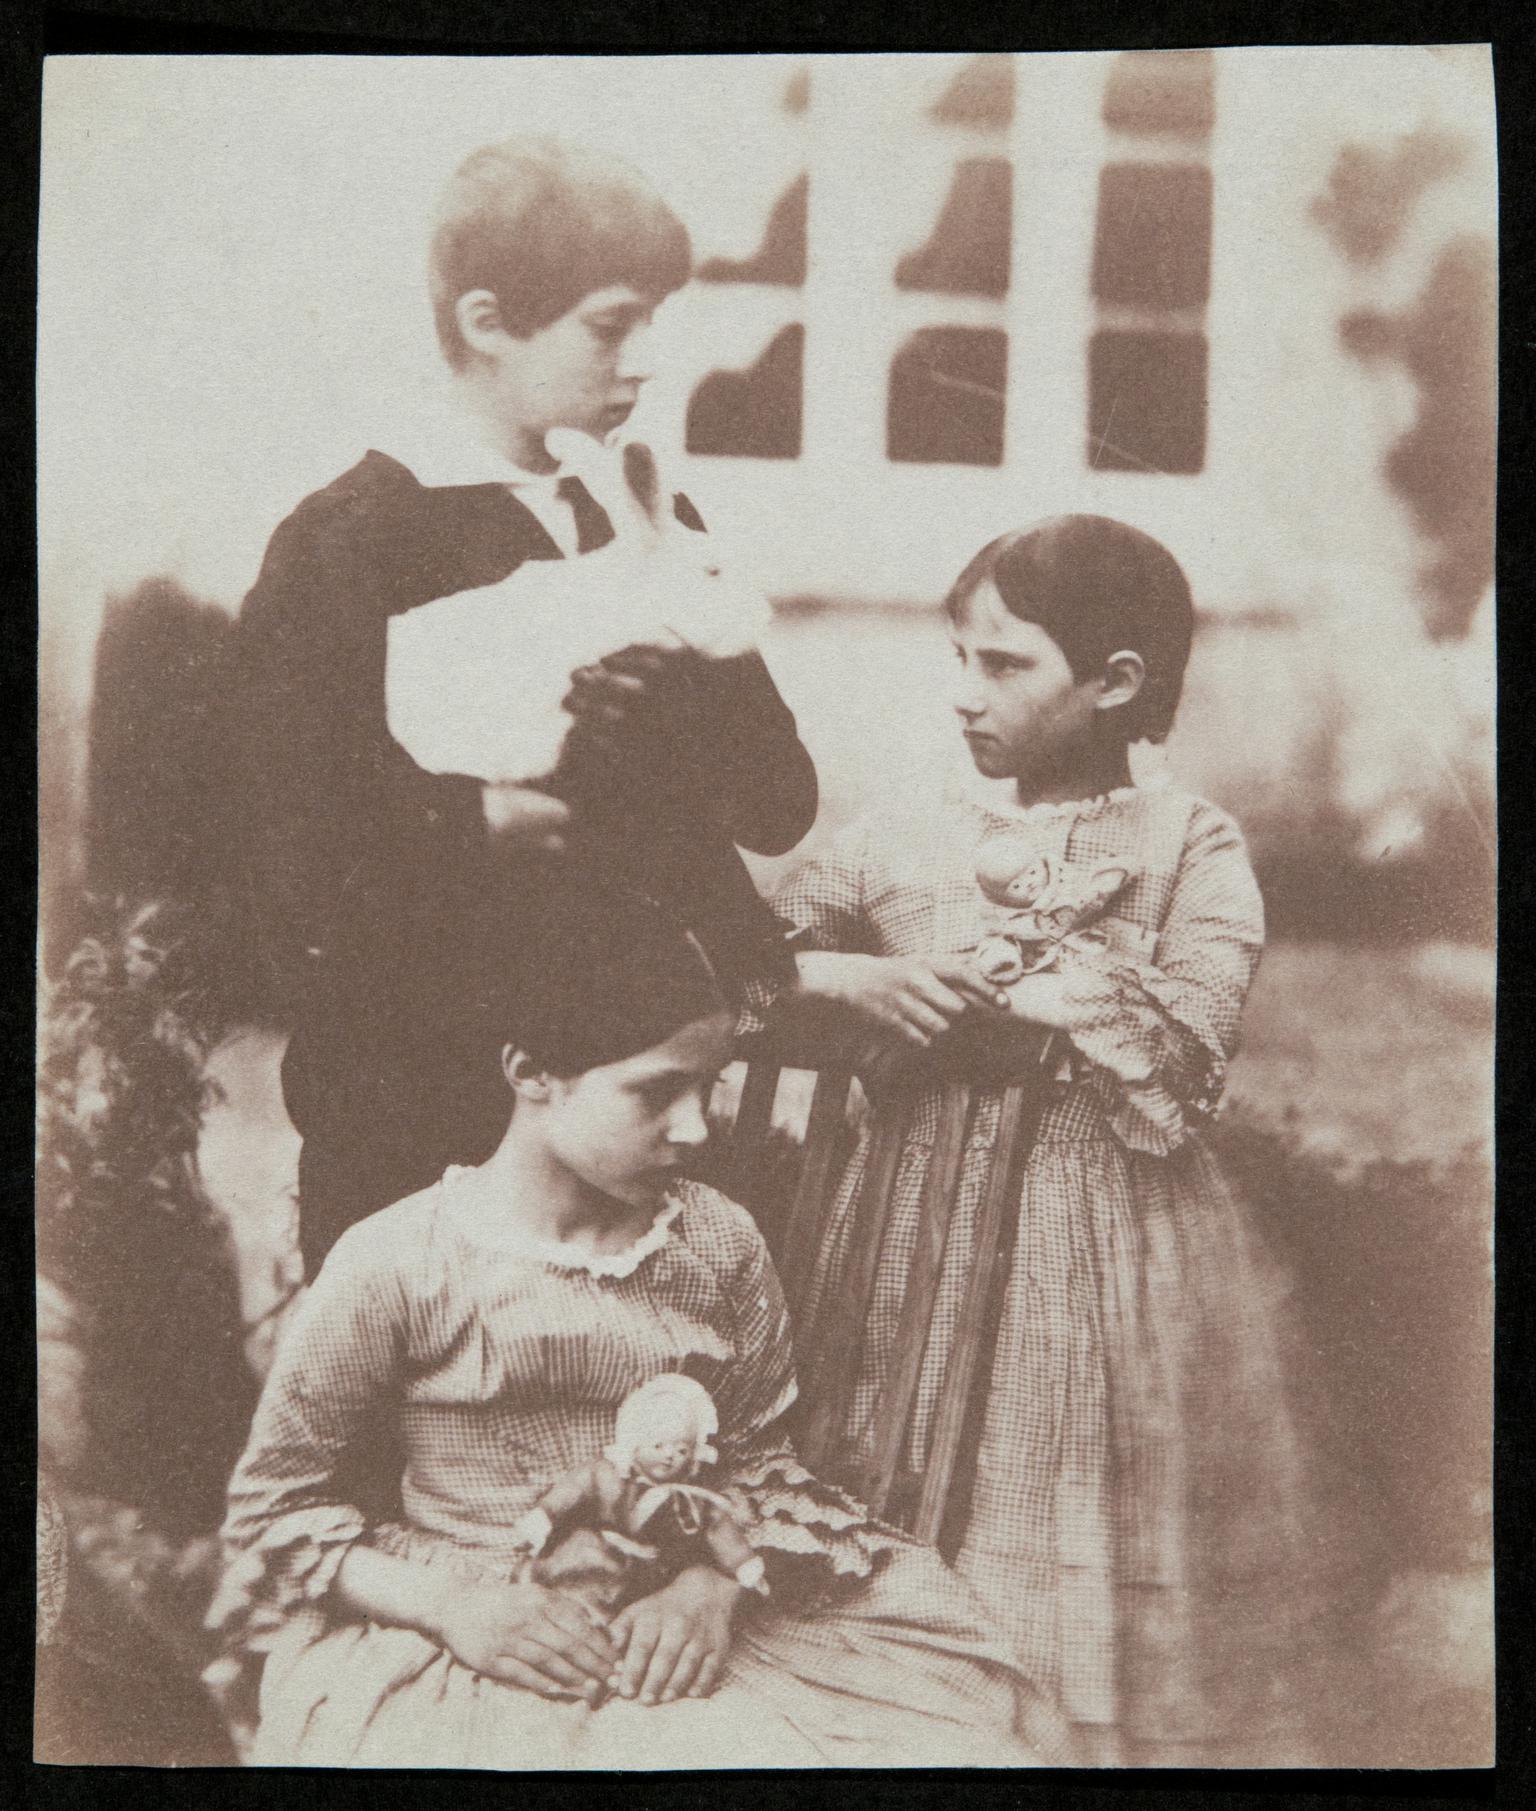 William, Elinor and Lucy, photograph